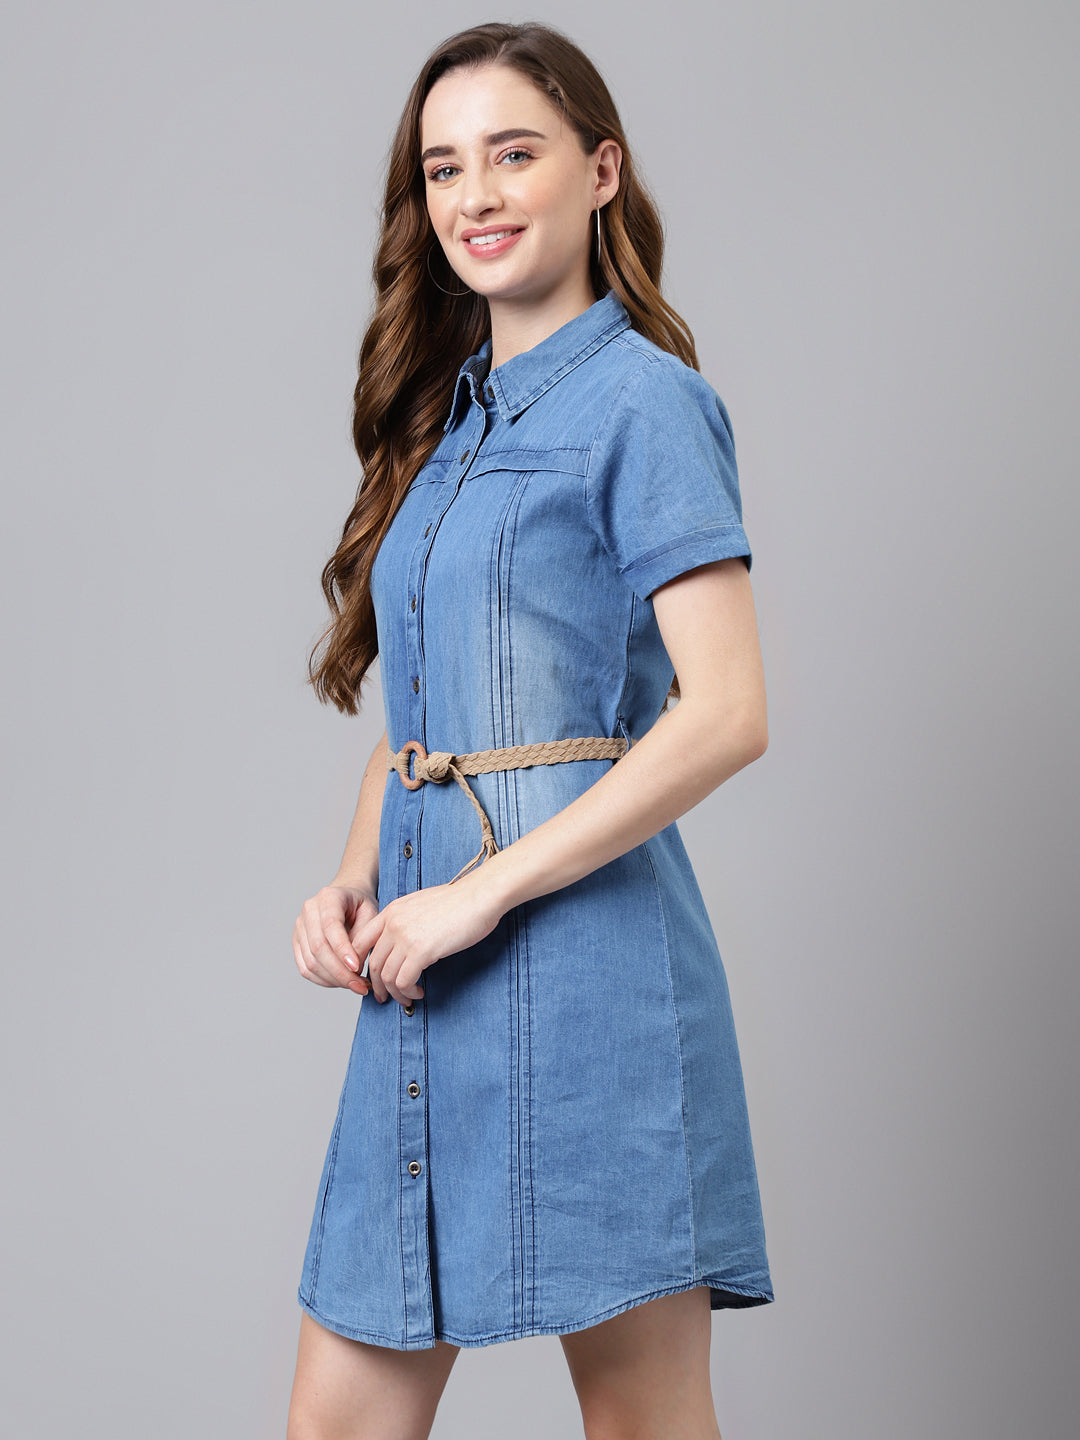 Blue Short Sleeves Shirt Collar Solid Mini Dress For Casual Wear